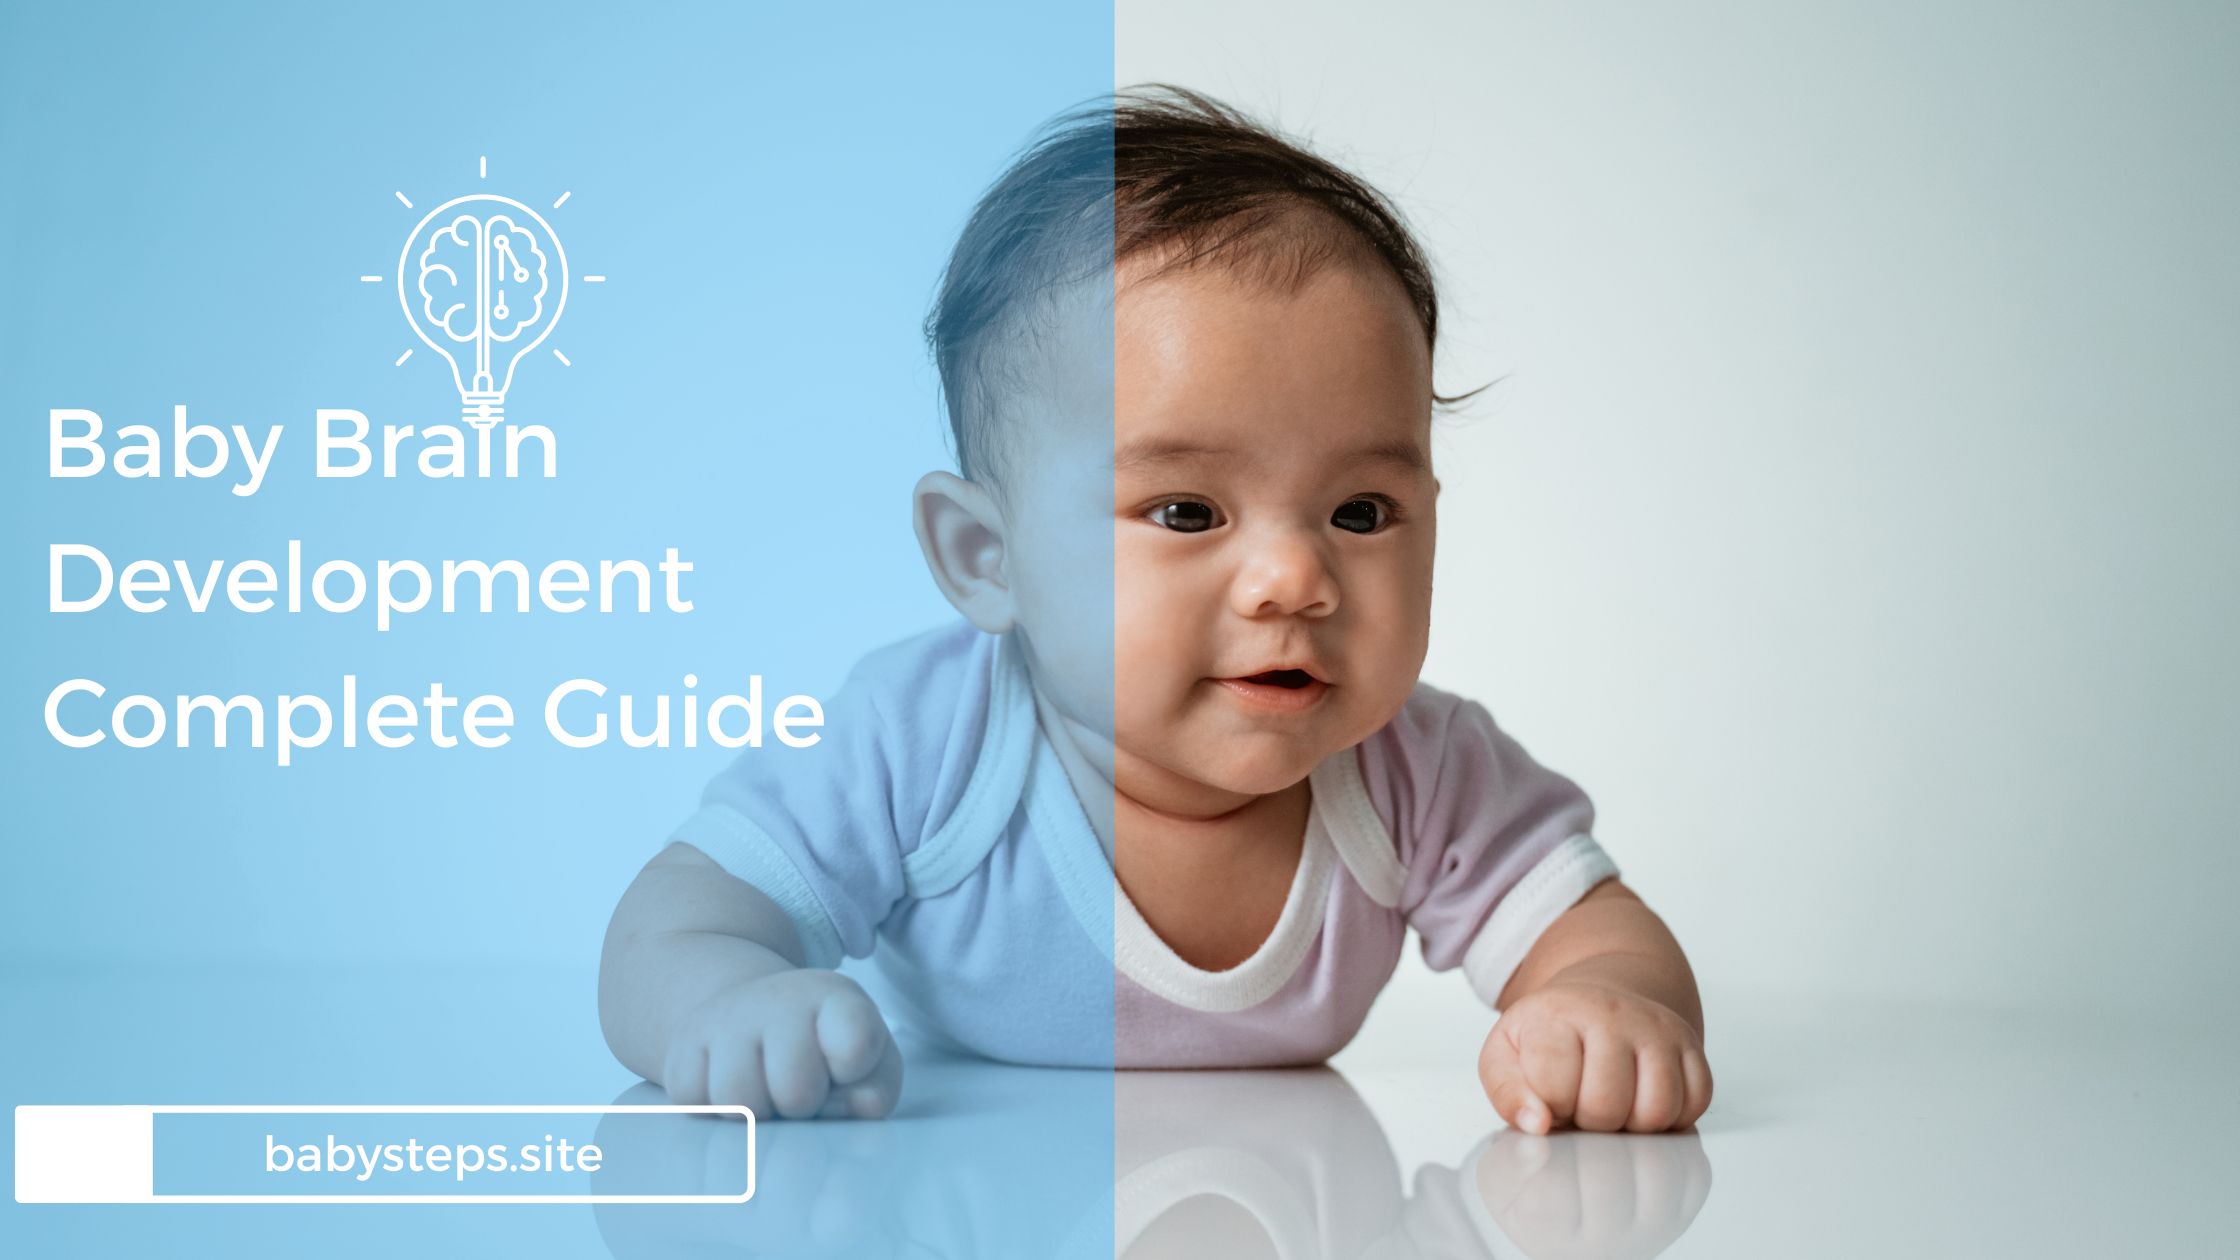 The Complete Guide to How to Stimulate Your Baby's Brain Development